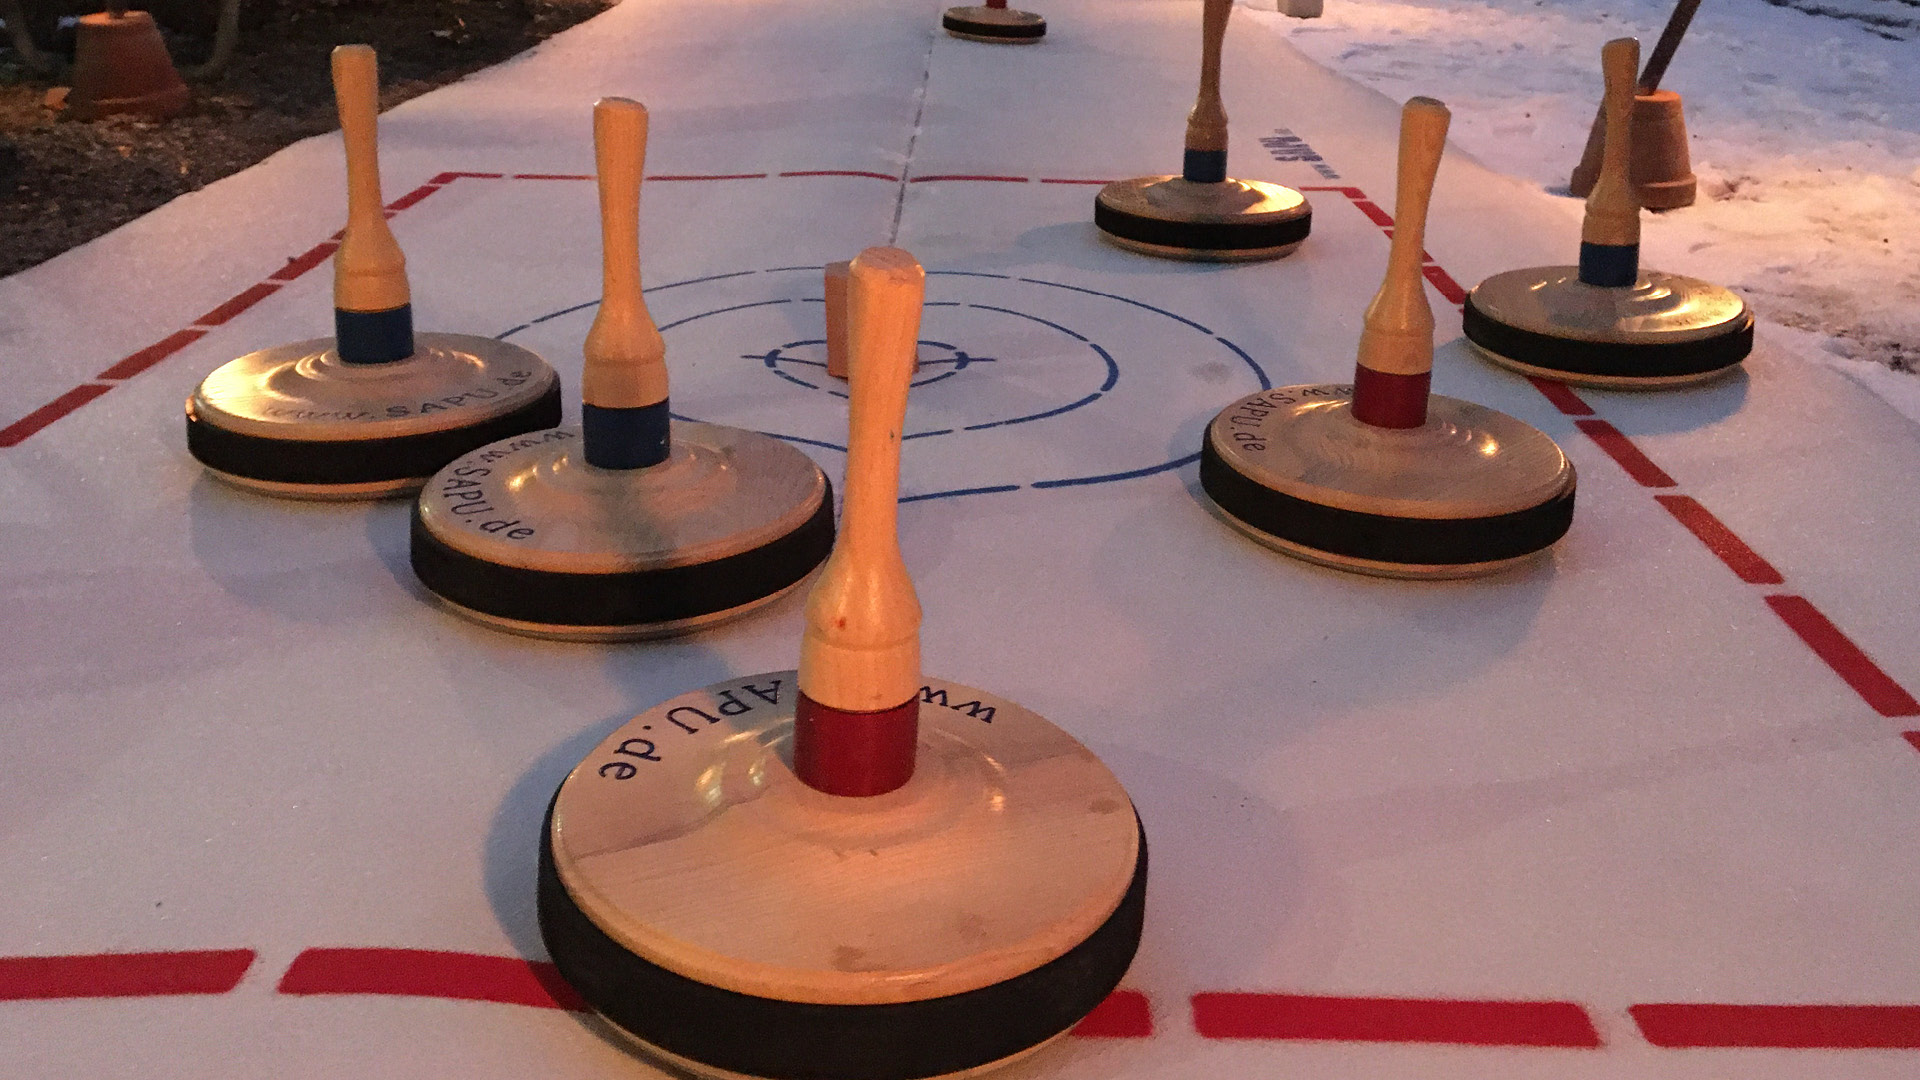 Only in winter. Curling on an artificial ice rink.